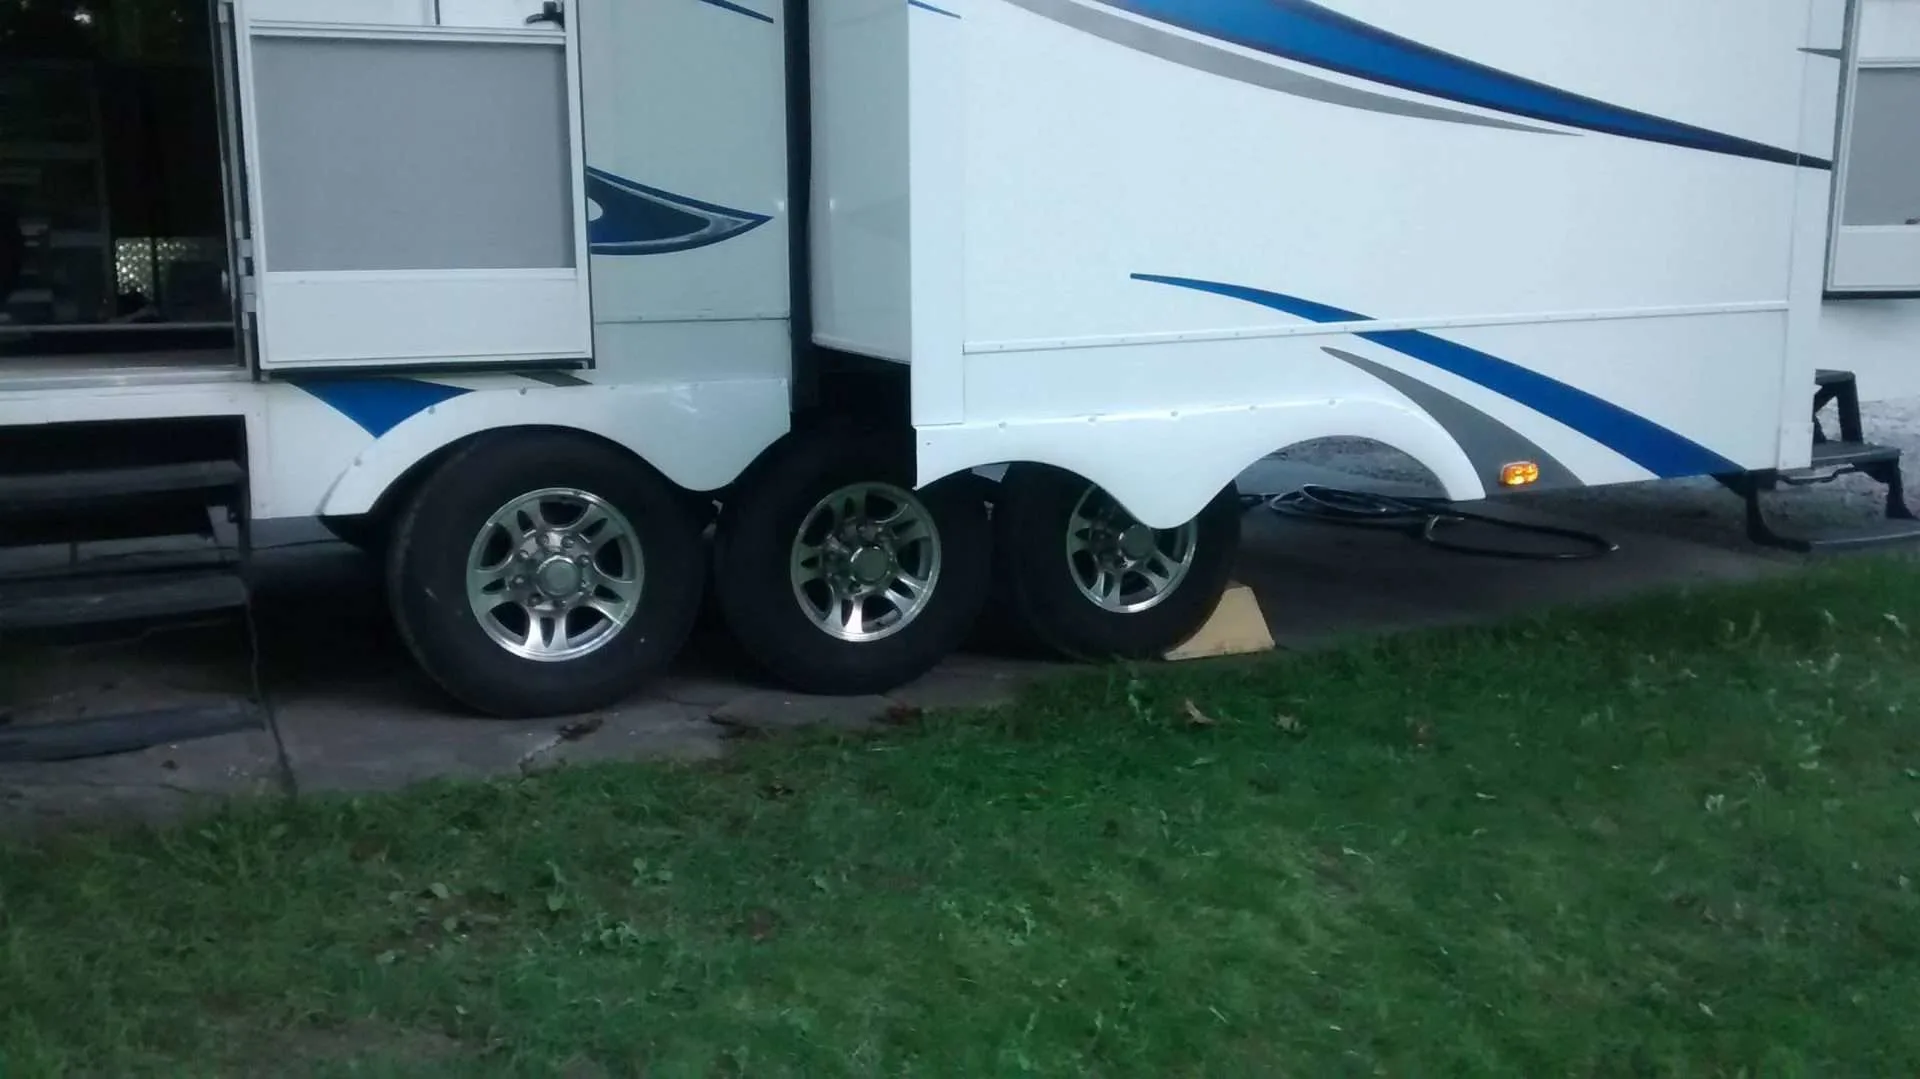 RV parked at campsite with wheel stabilizer.